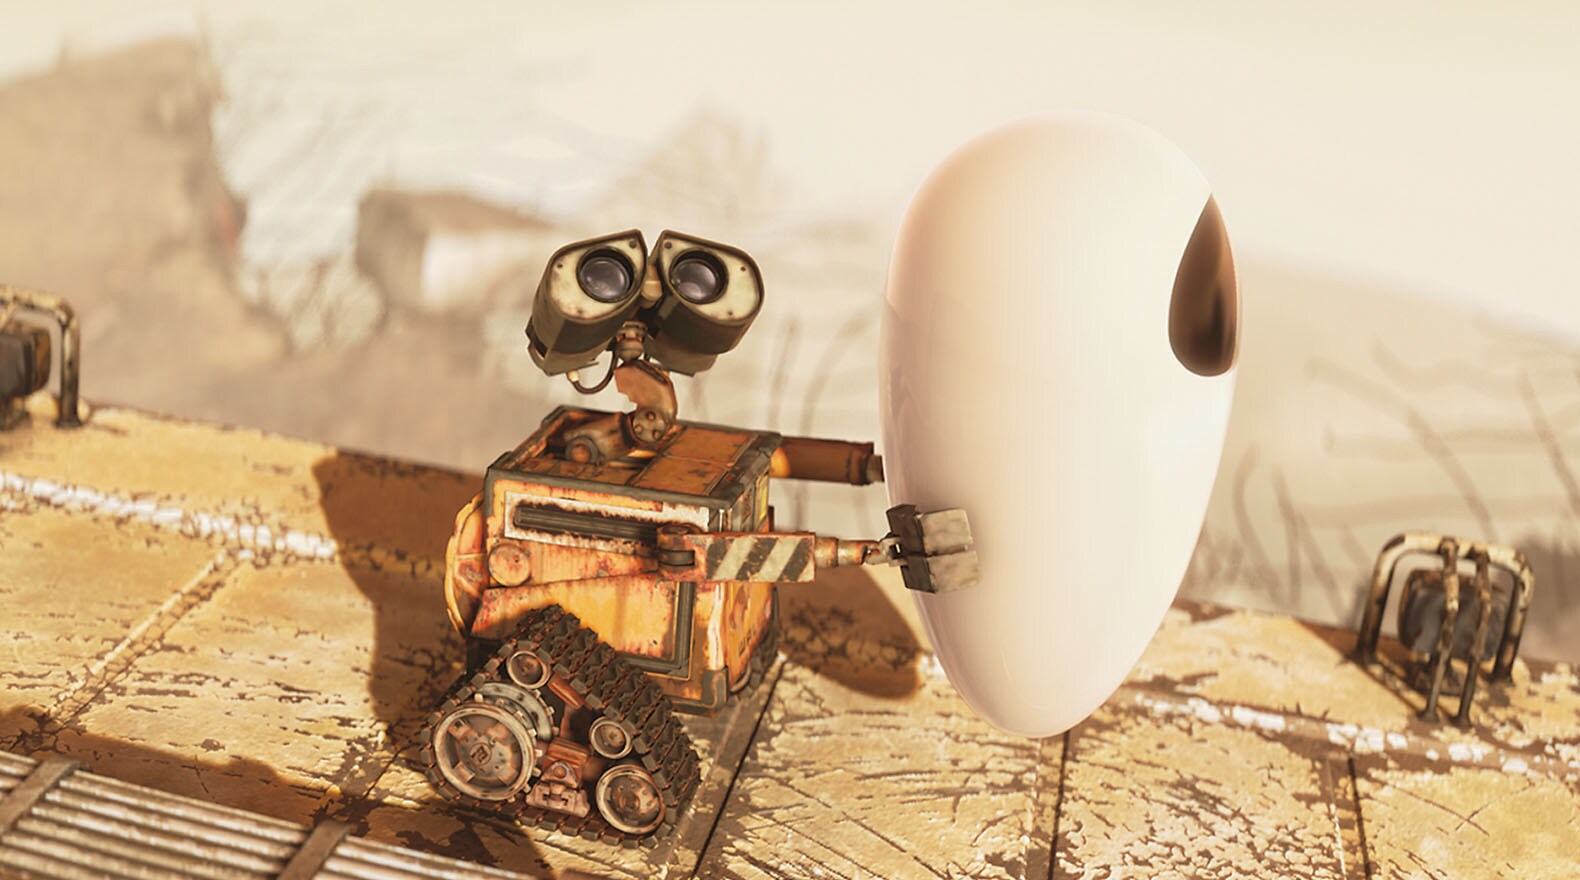 WALL•E holds on to the things he loves, from the movie "Wall-E"